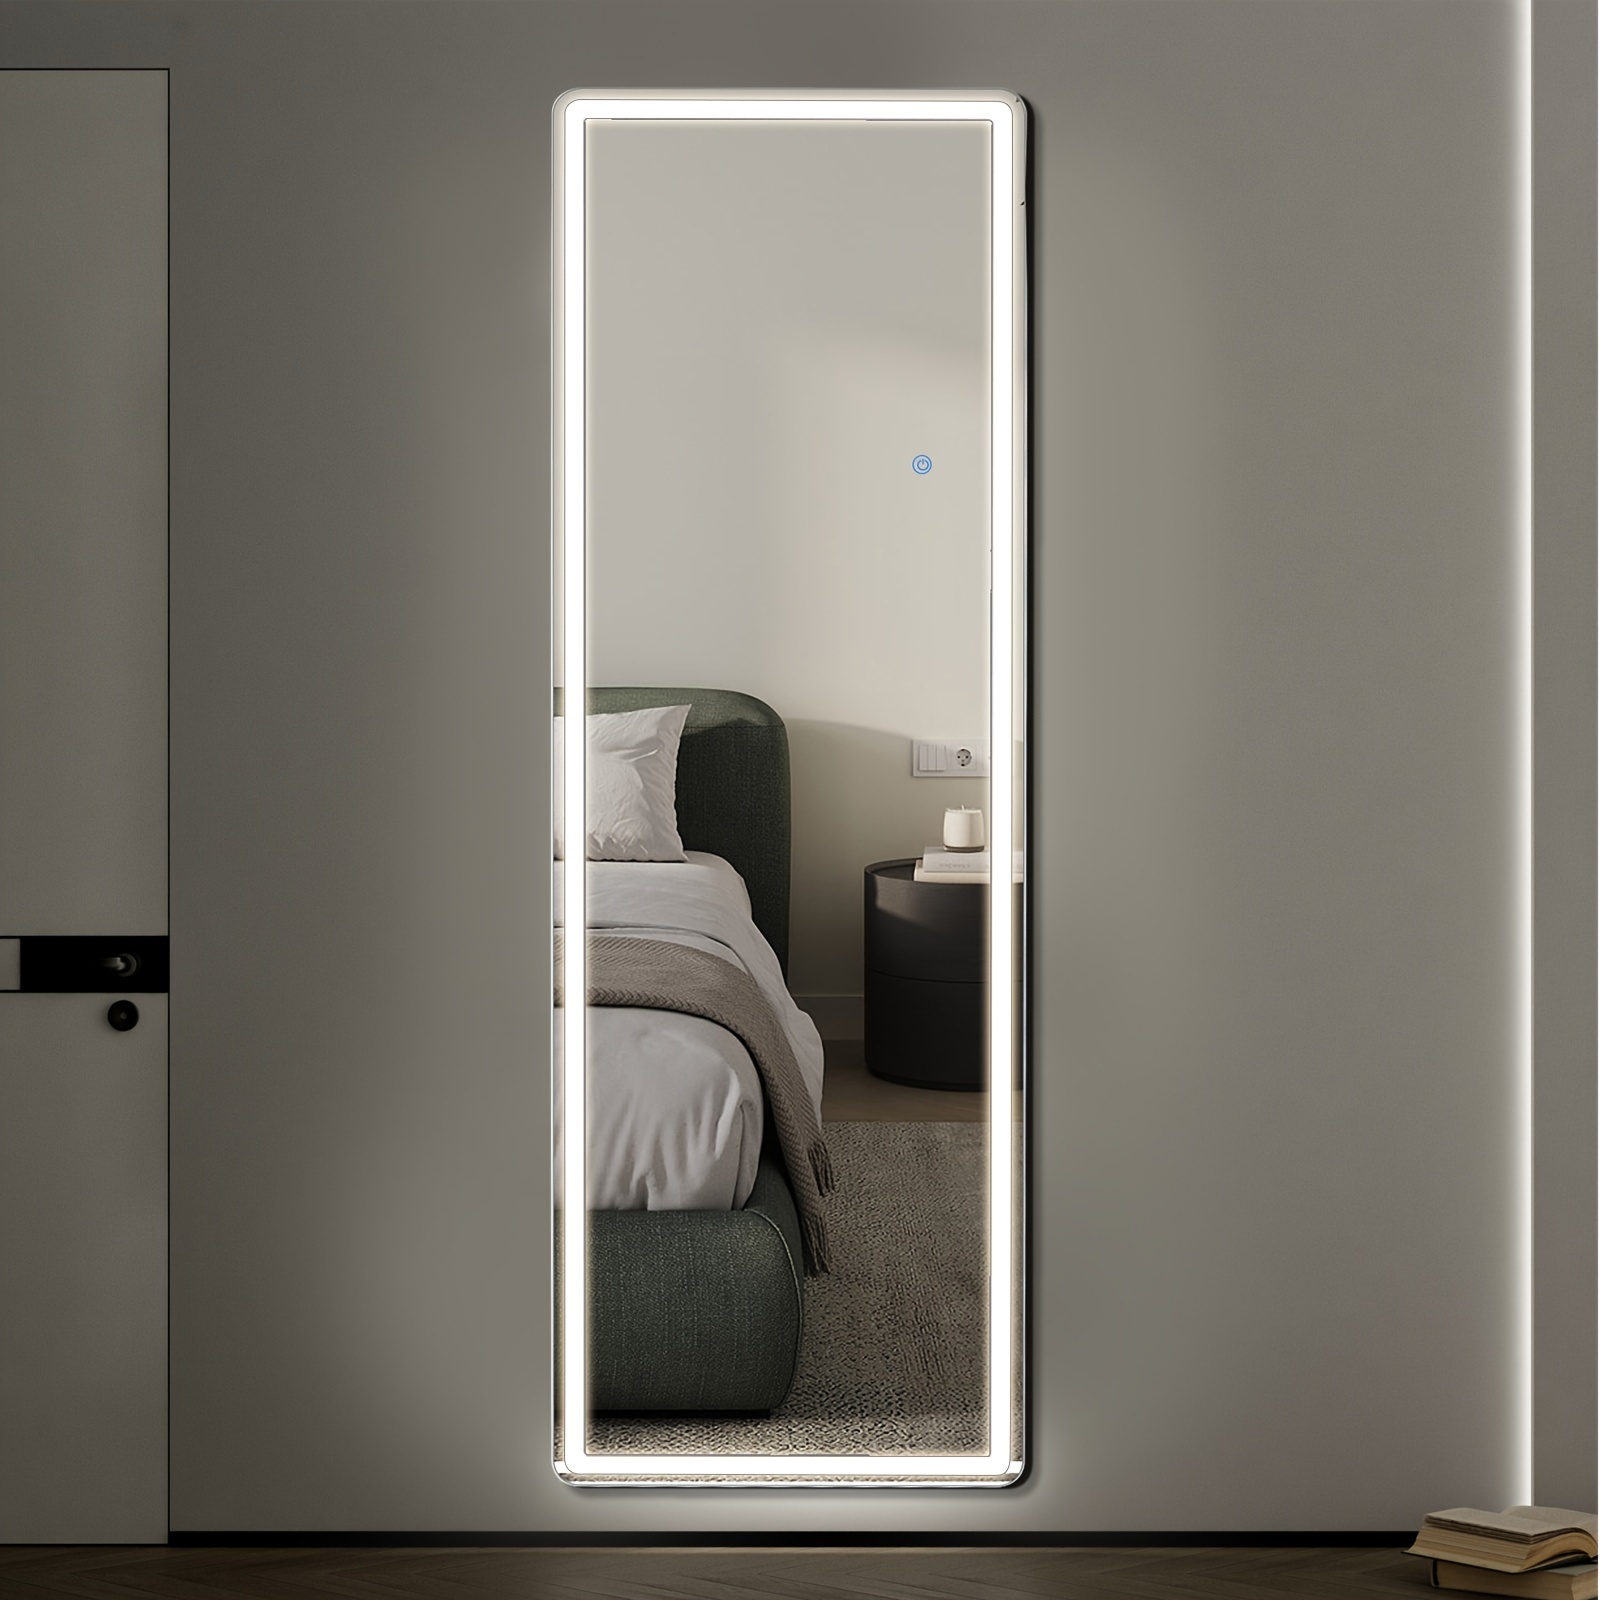 

Led Full Length Standing Mirror, 64"x21" Mirror With Led Lights, Traditional Style Lighted Floor Mirror, 3 Color Adjustable Light Settings, Hanging Or Leaning For Wall